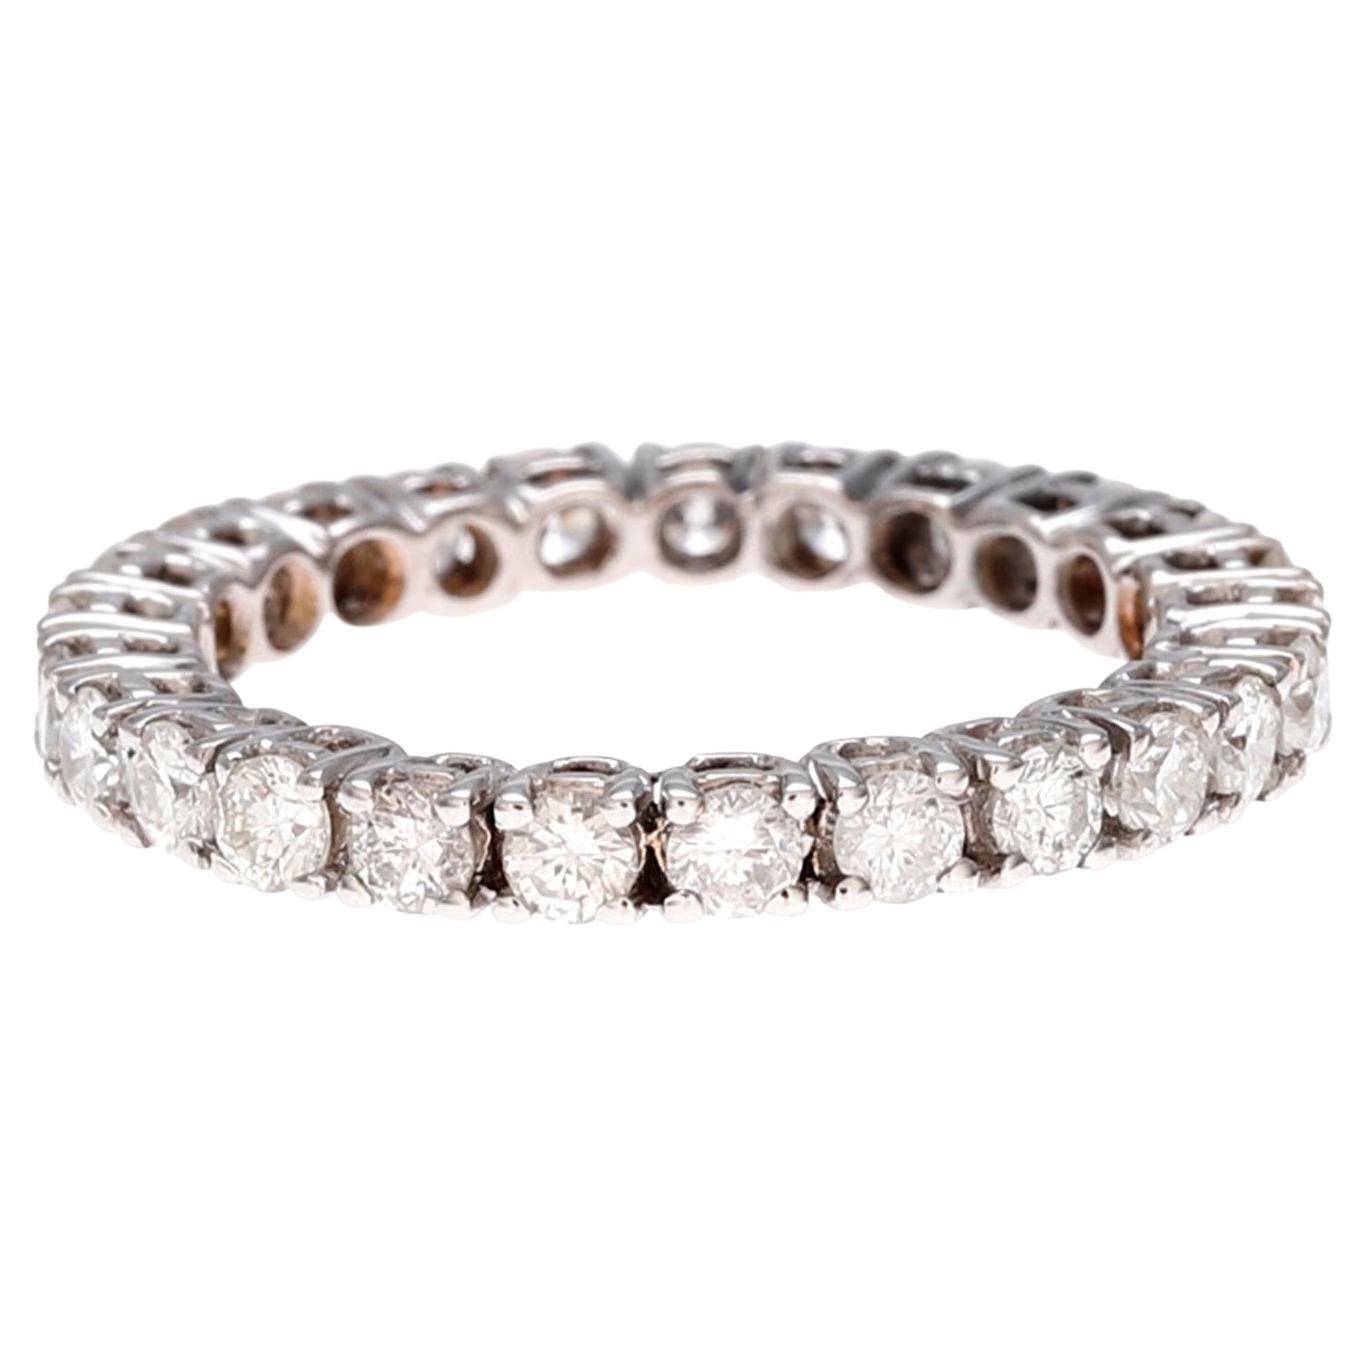 Classic and beautiful eternity band ring in white gold weight 3.55 grams 18 Karats with 32 Diamonds brilliant cut total weight 1.5 carats color G-H and clarity VS1-SI1. Setting Prongs.
Ring size: 14 Europe/ 53.8 American

